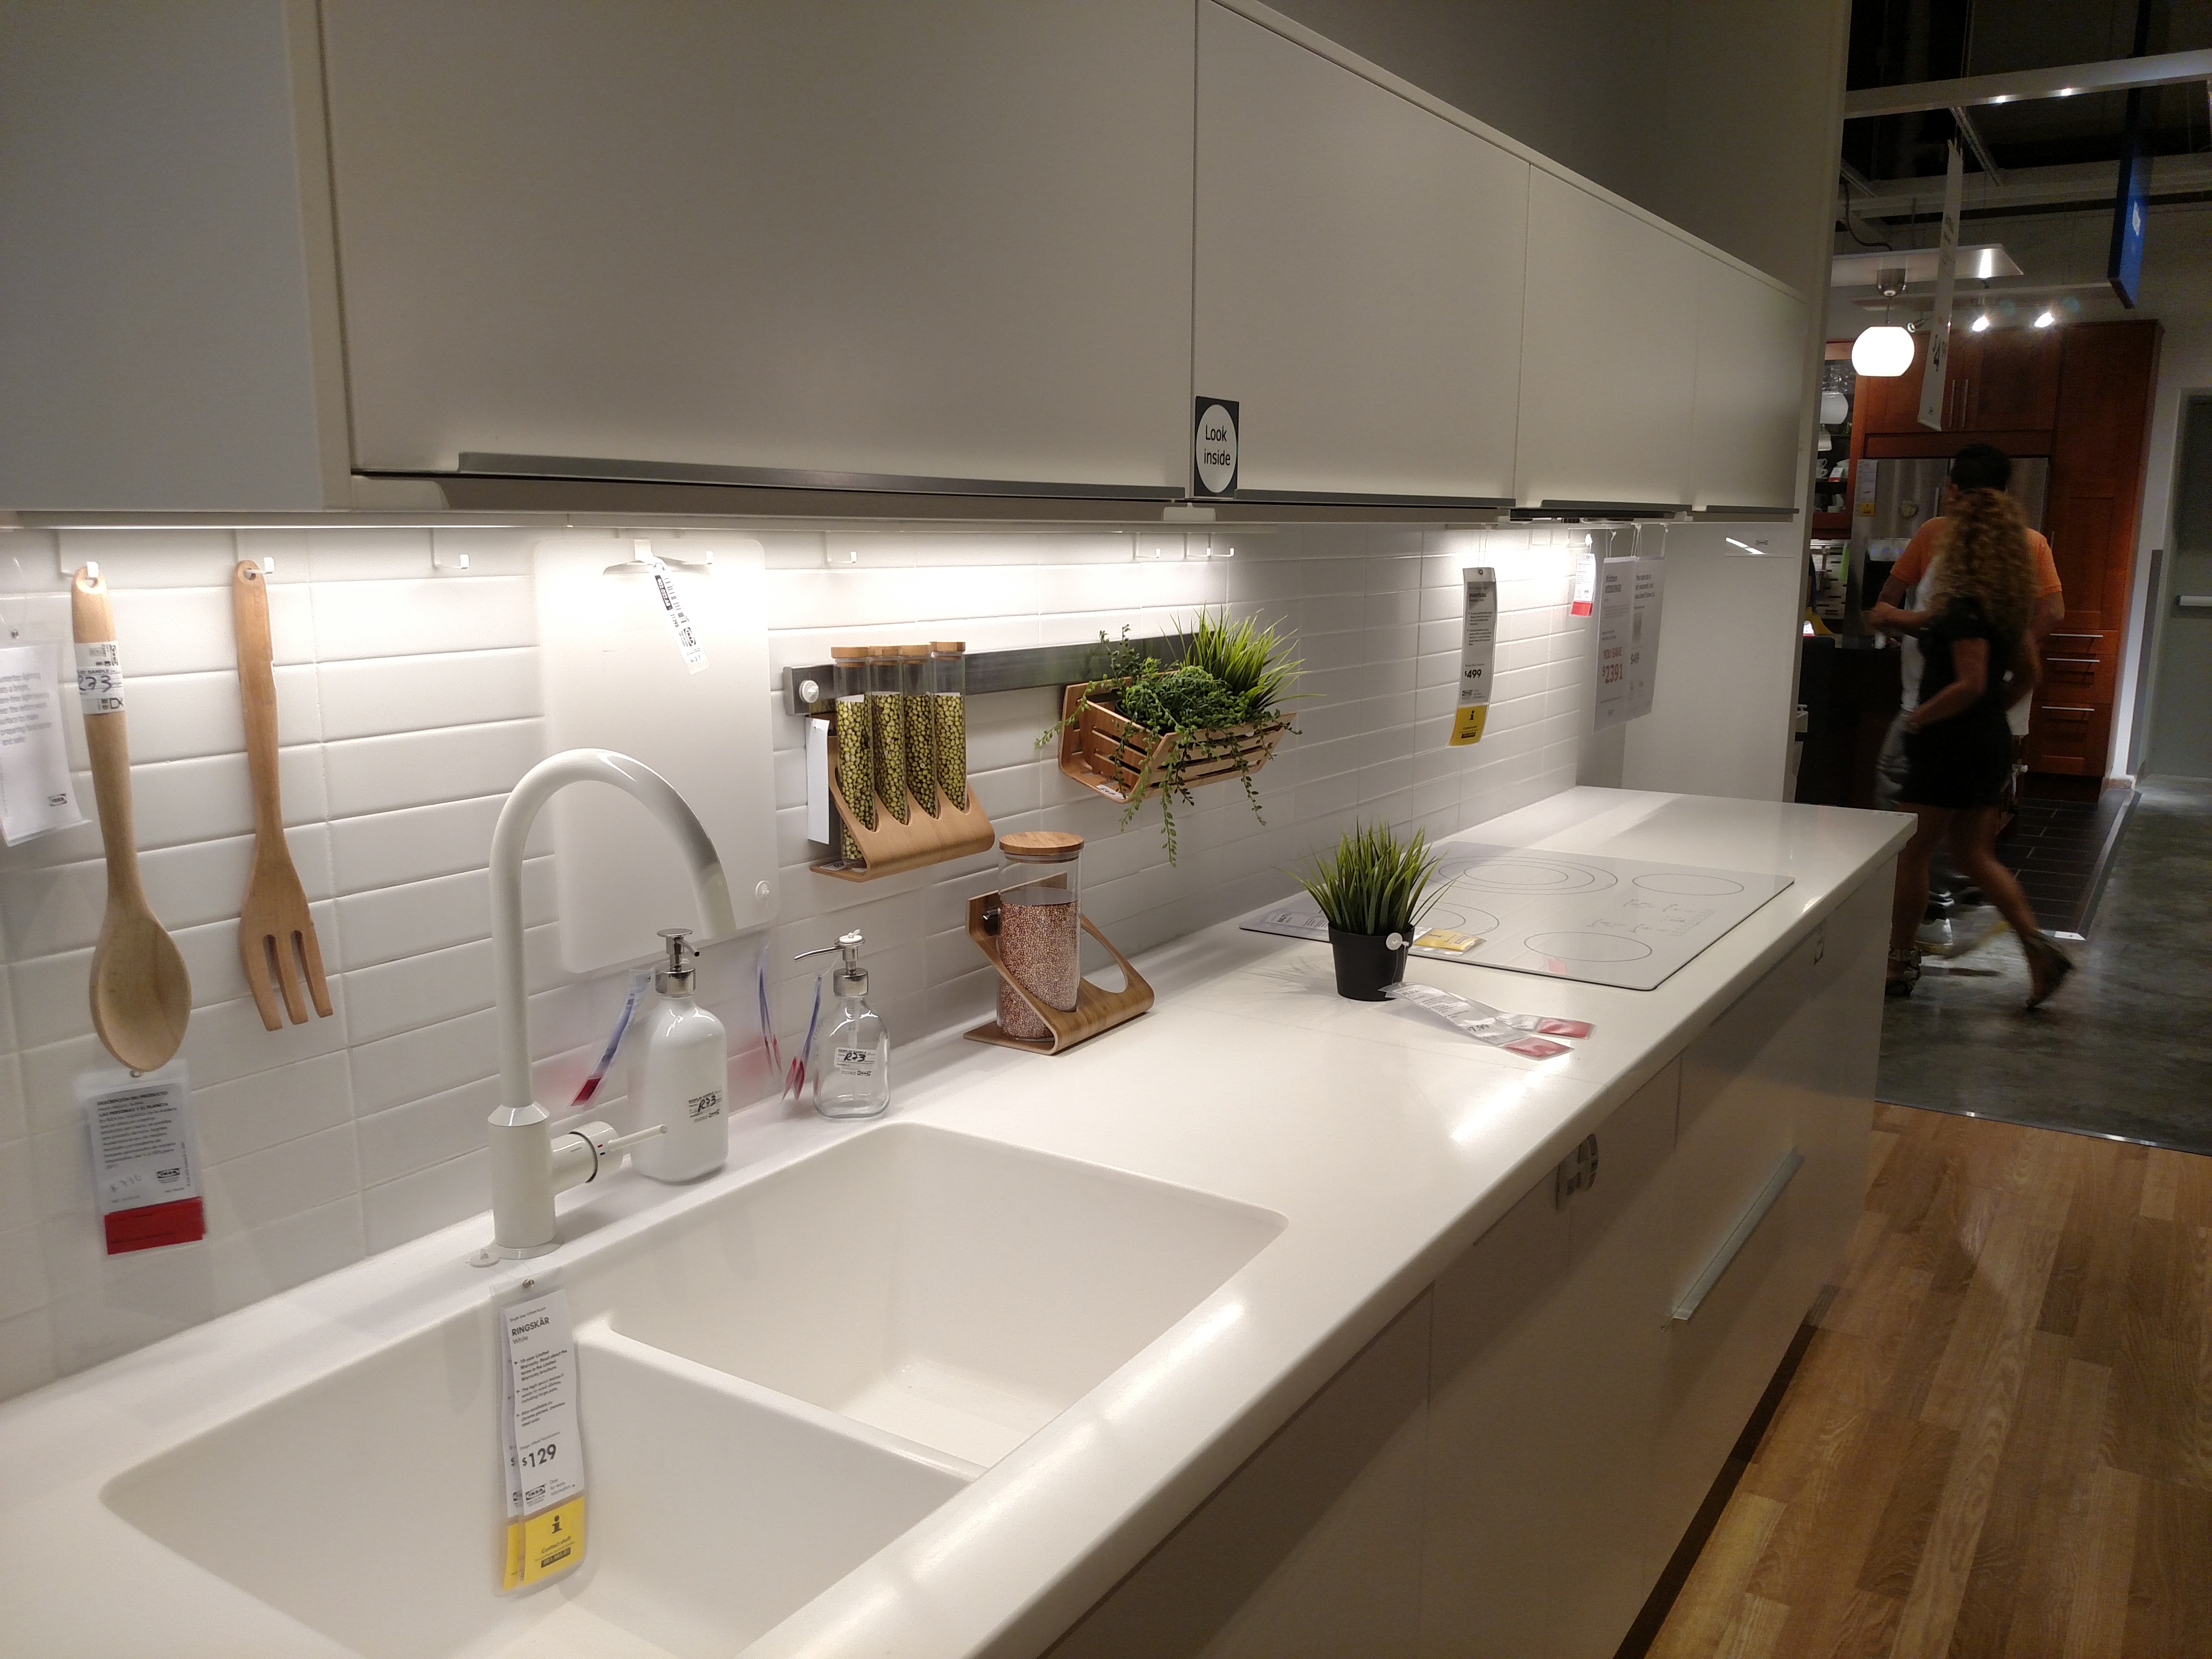 ikea sink kitchen integrated acrylic countertop personlig backsplash faucet countertops sinks invisible against showroom base lines board kitchens disappear almost